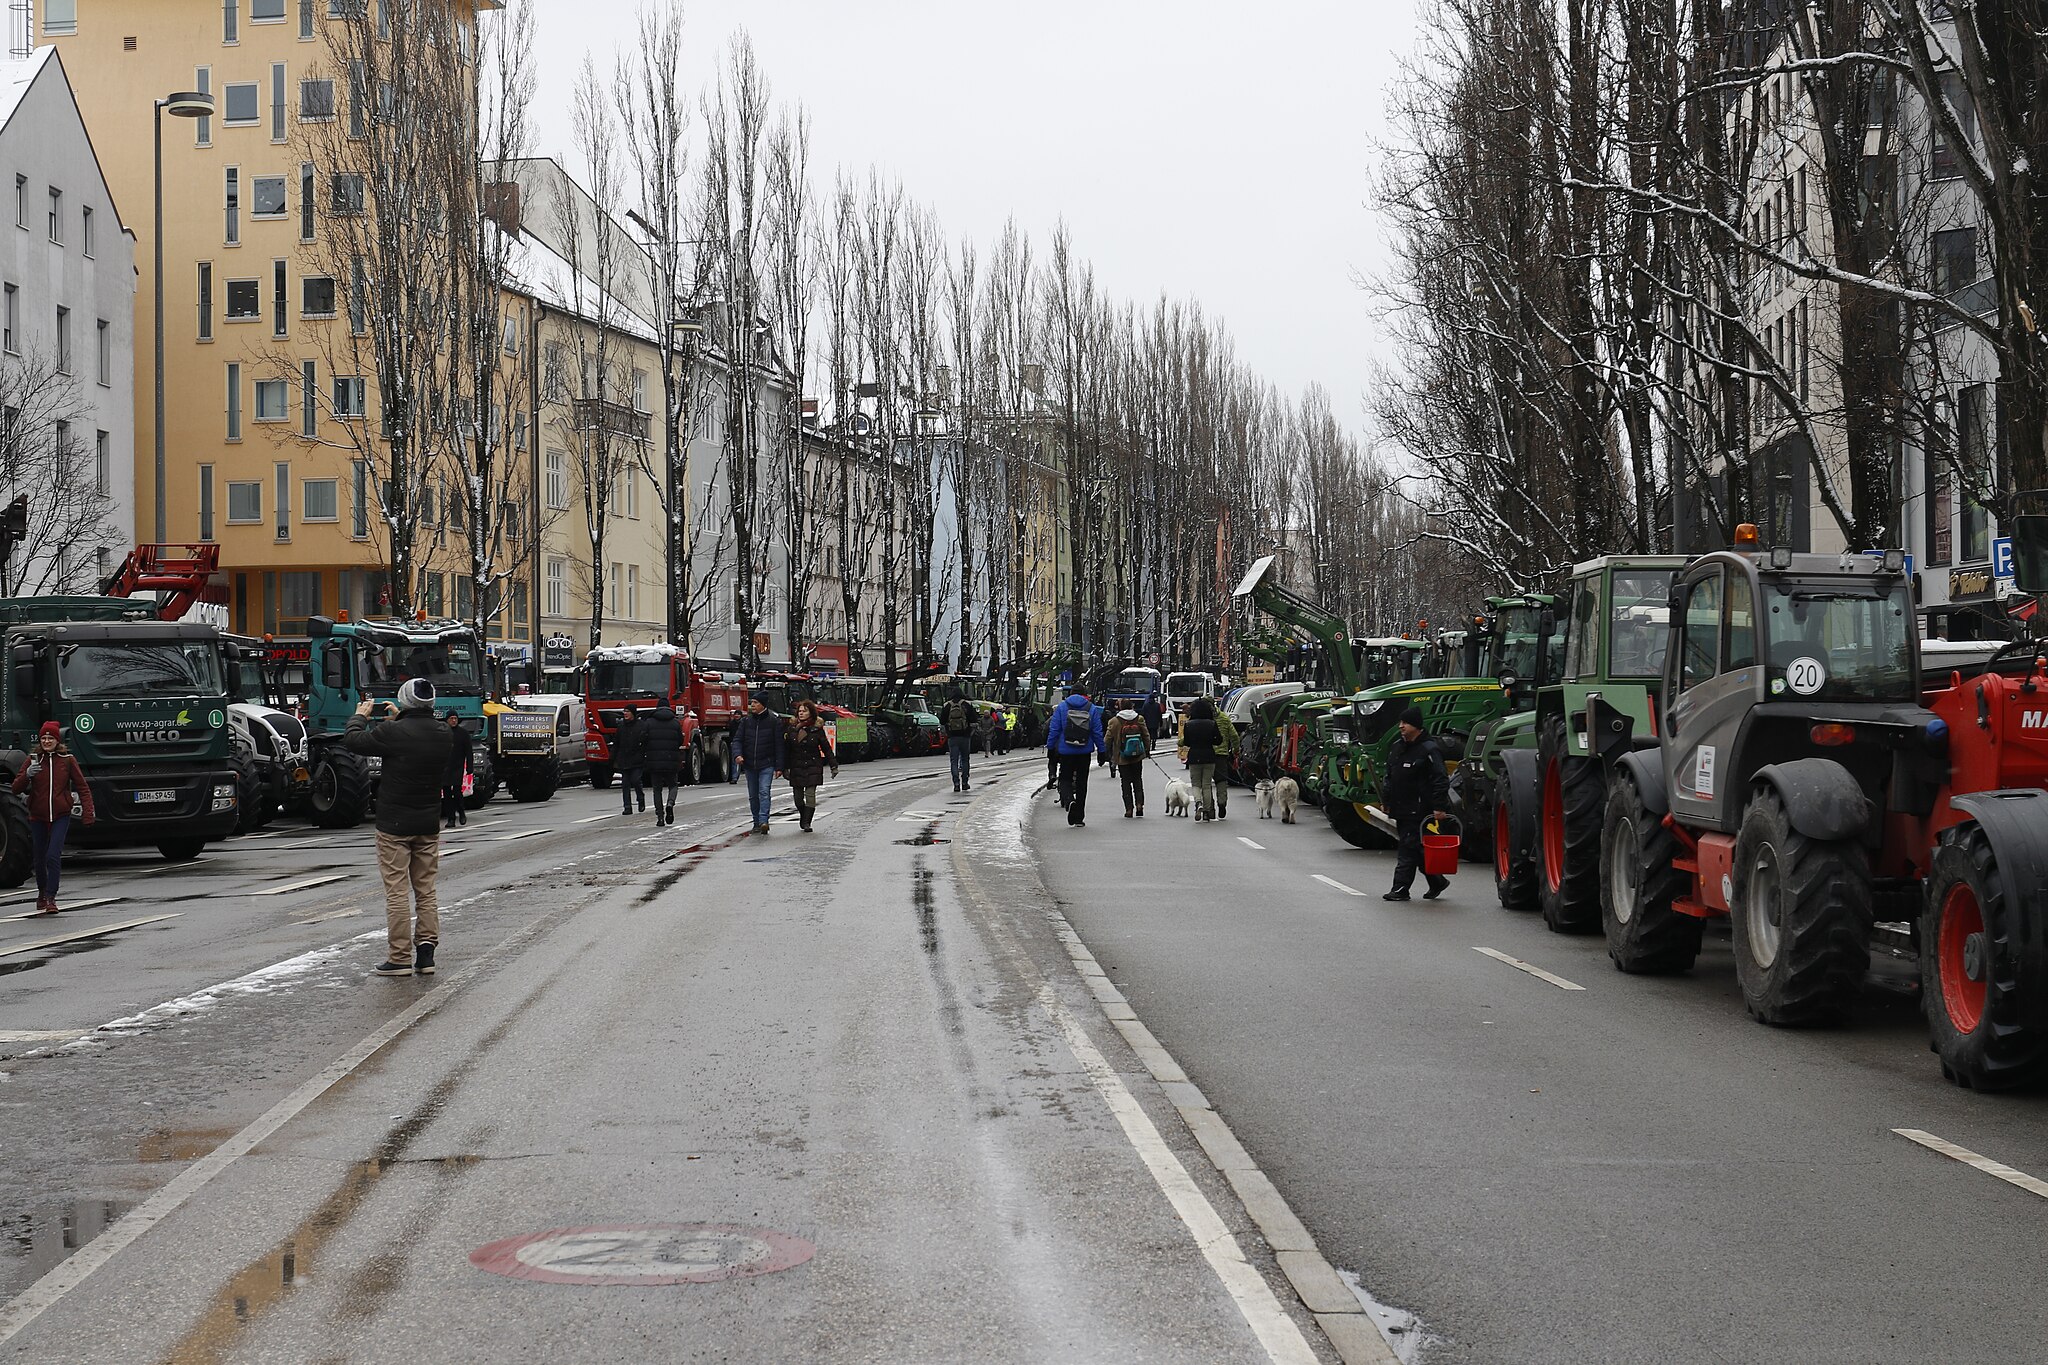 Polish farmers launch 30-day nationwide protests in response to economic pressures